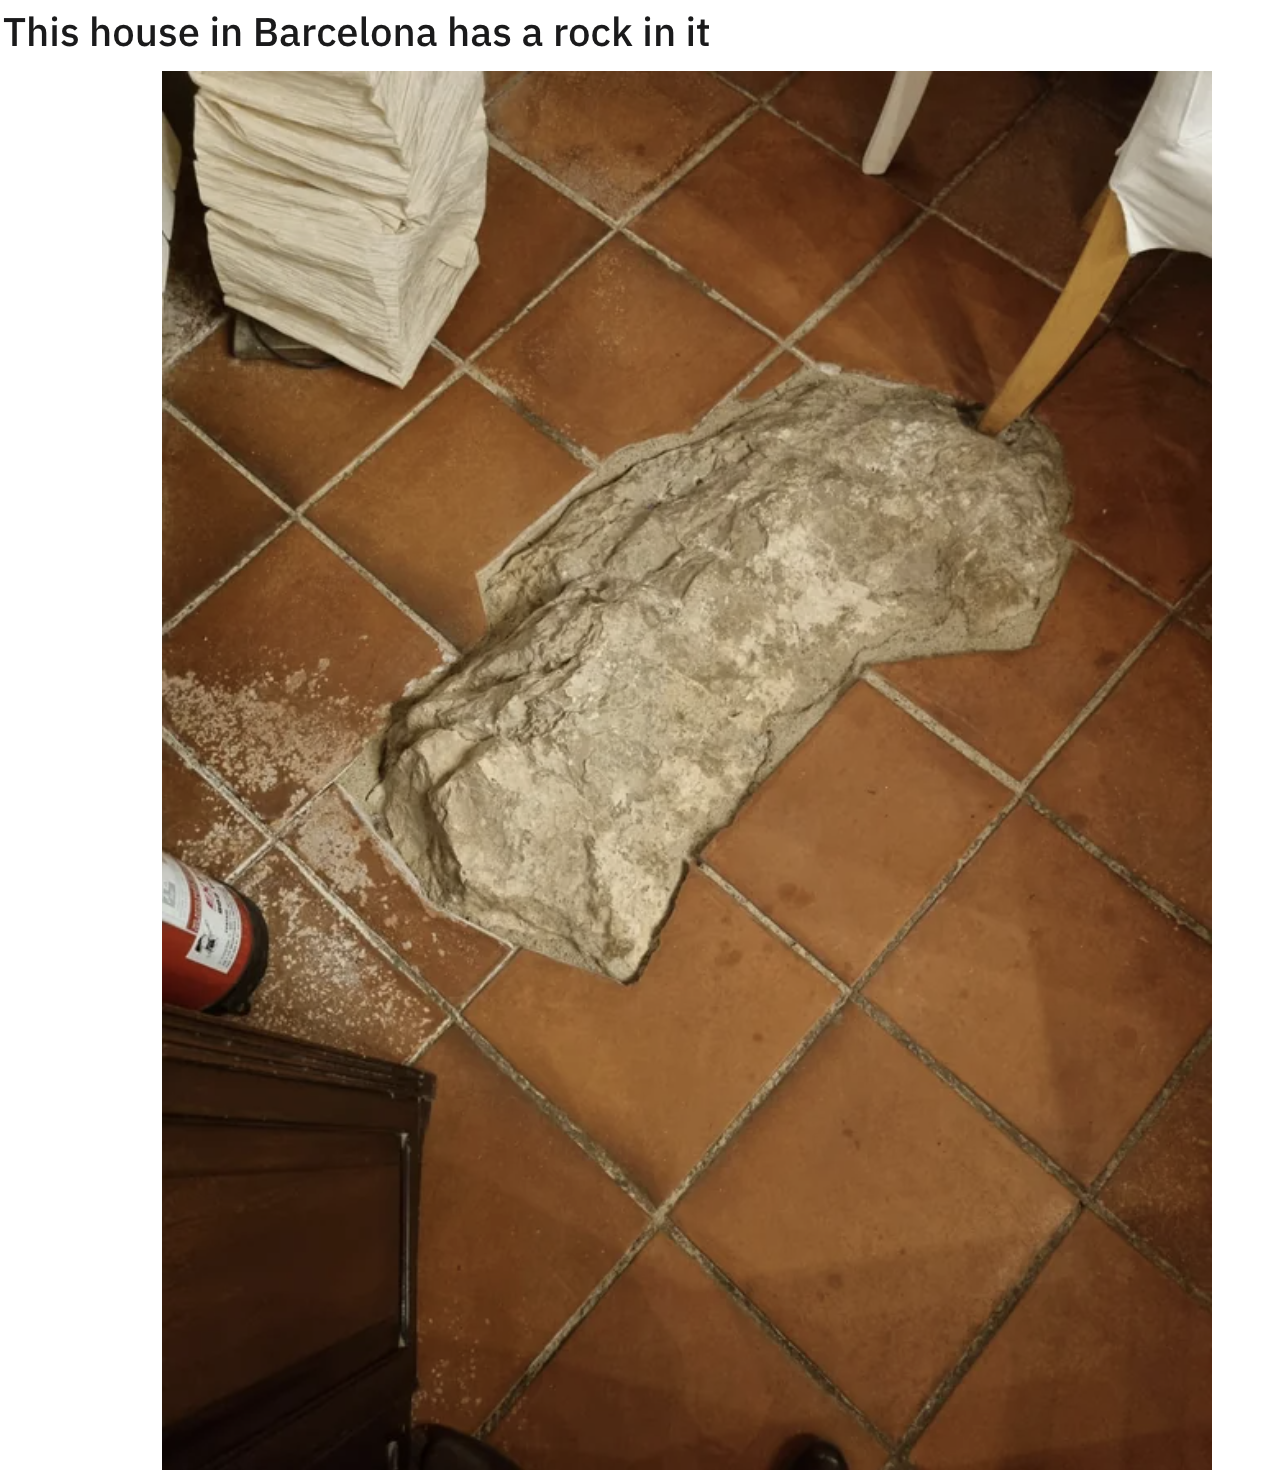 large rock exposed through the tile of the floor